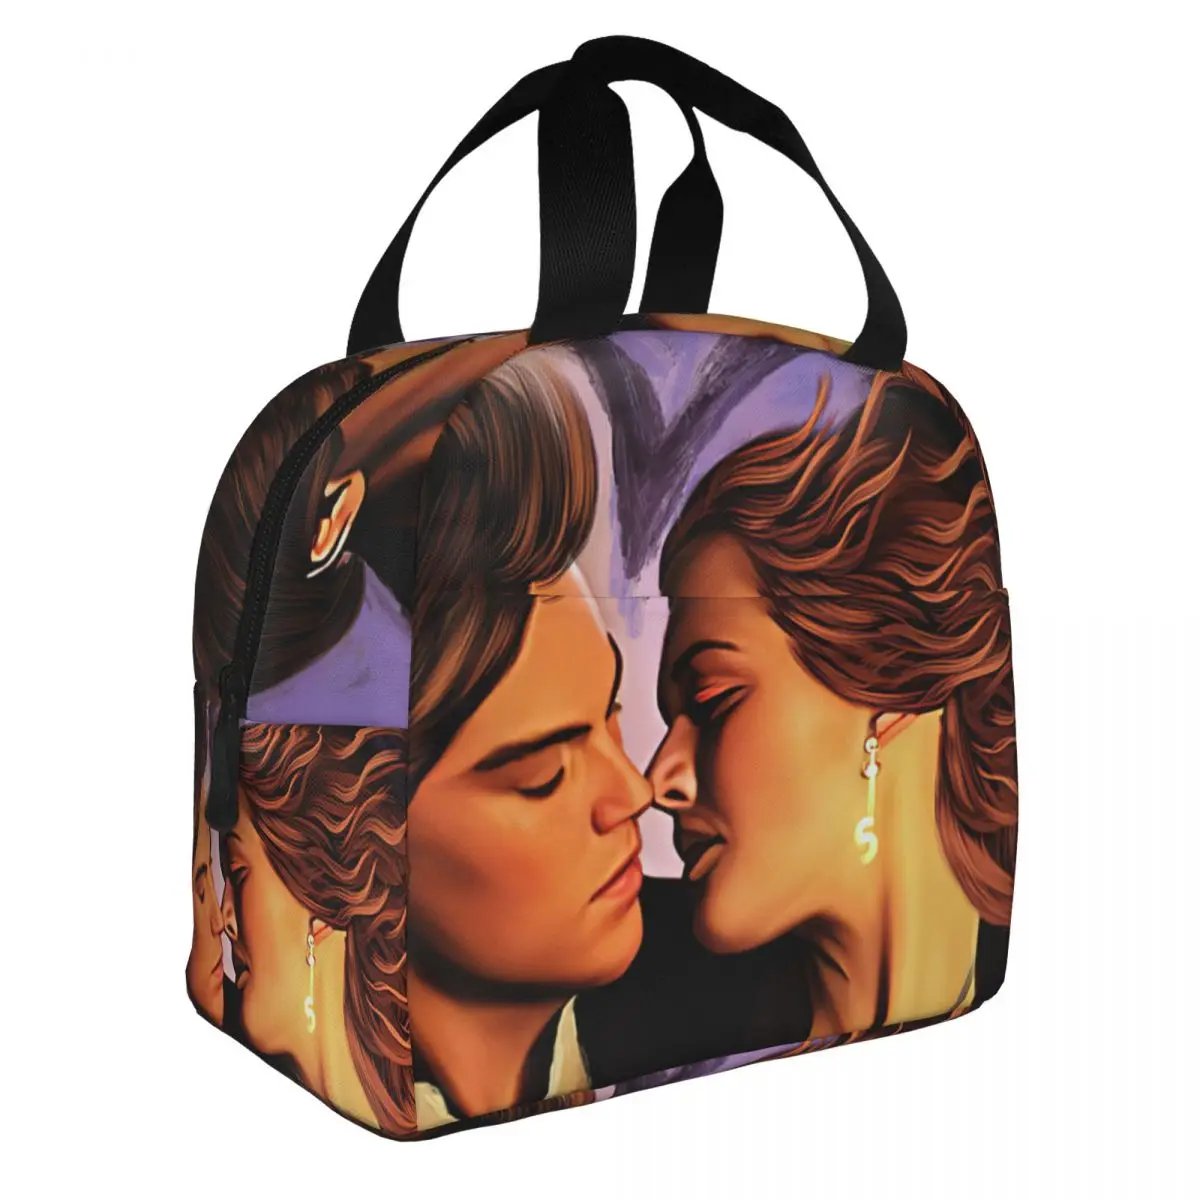 Titanic Jack And Rose Lunch Bento Bags Portable Aluminum Foil thickened Thermal Cloth Lunch Bag for Women Men Boy